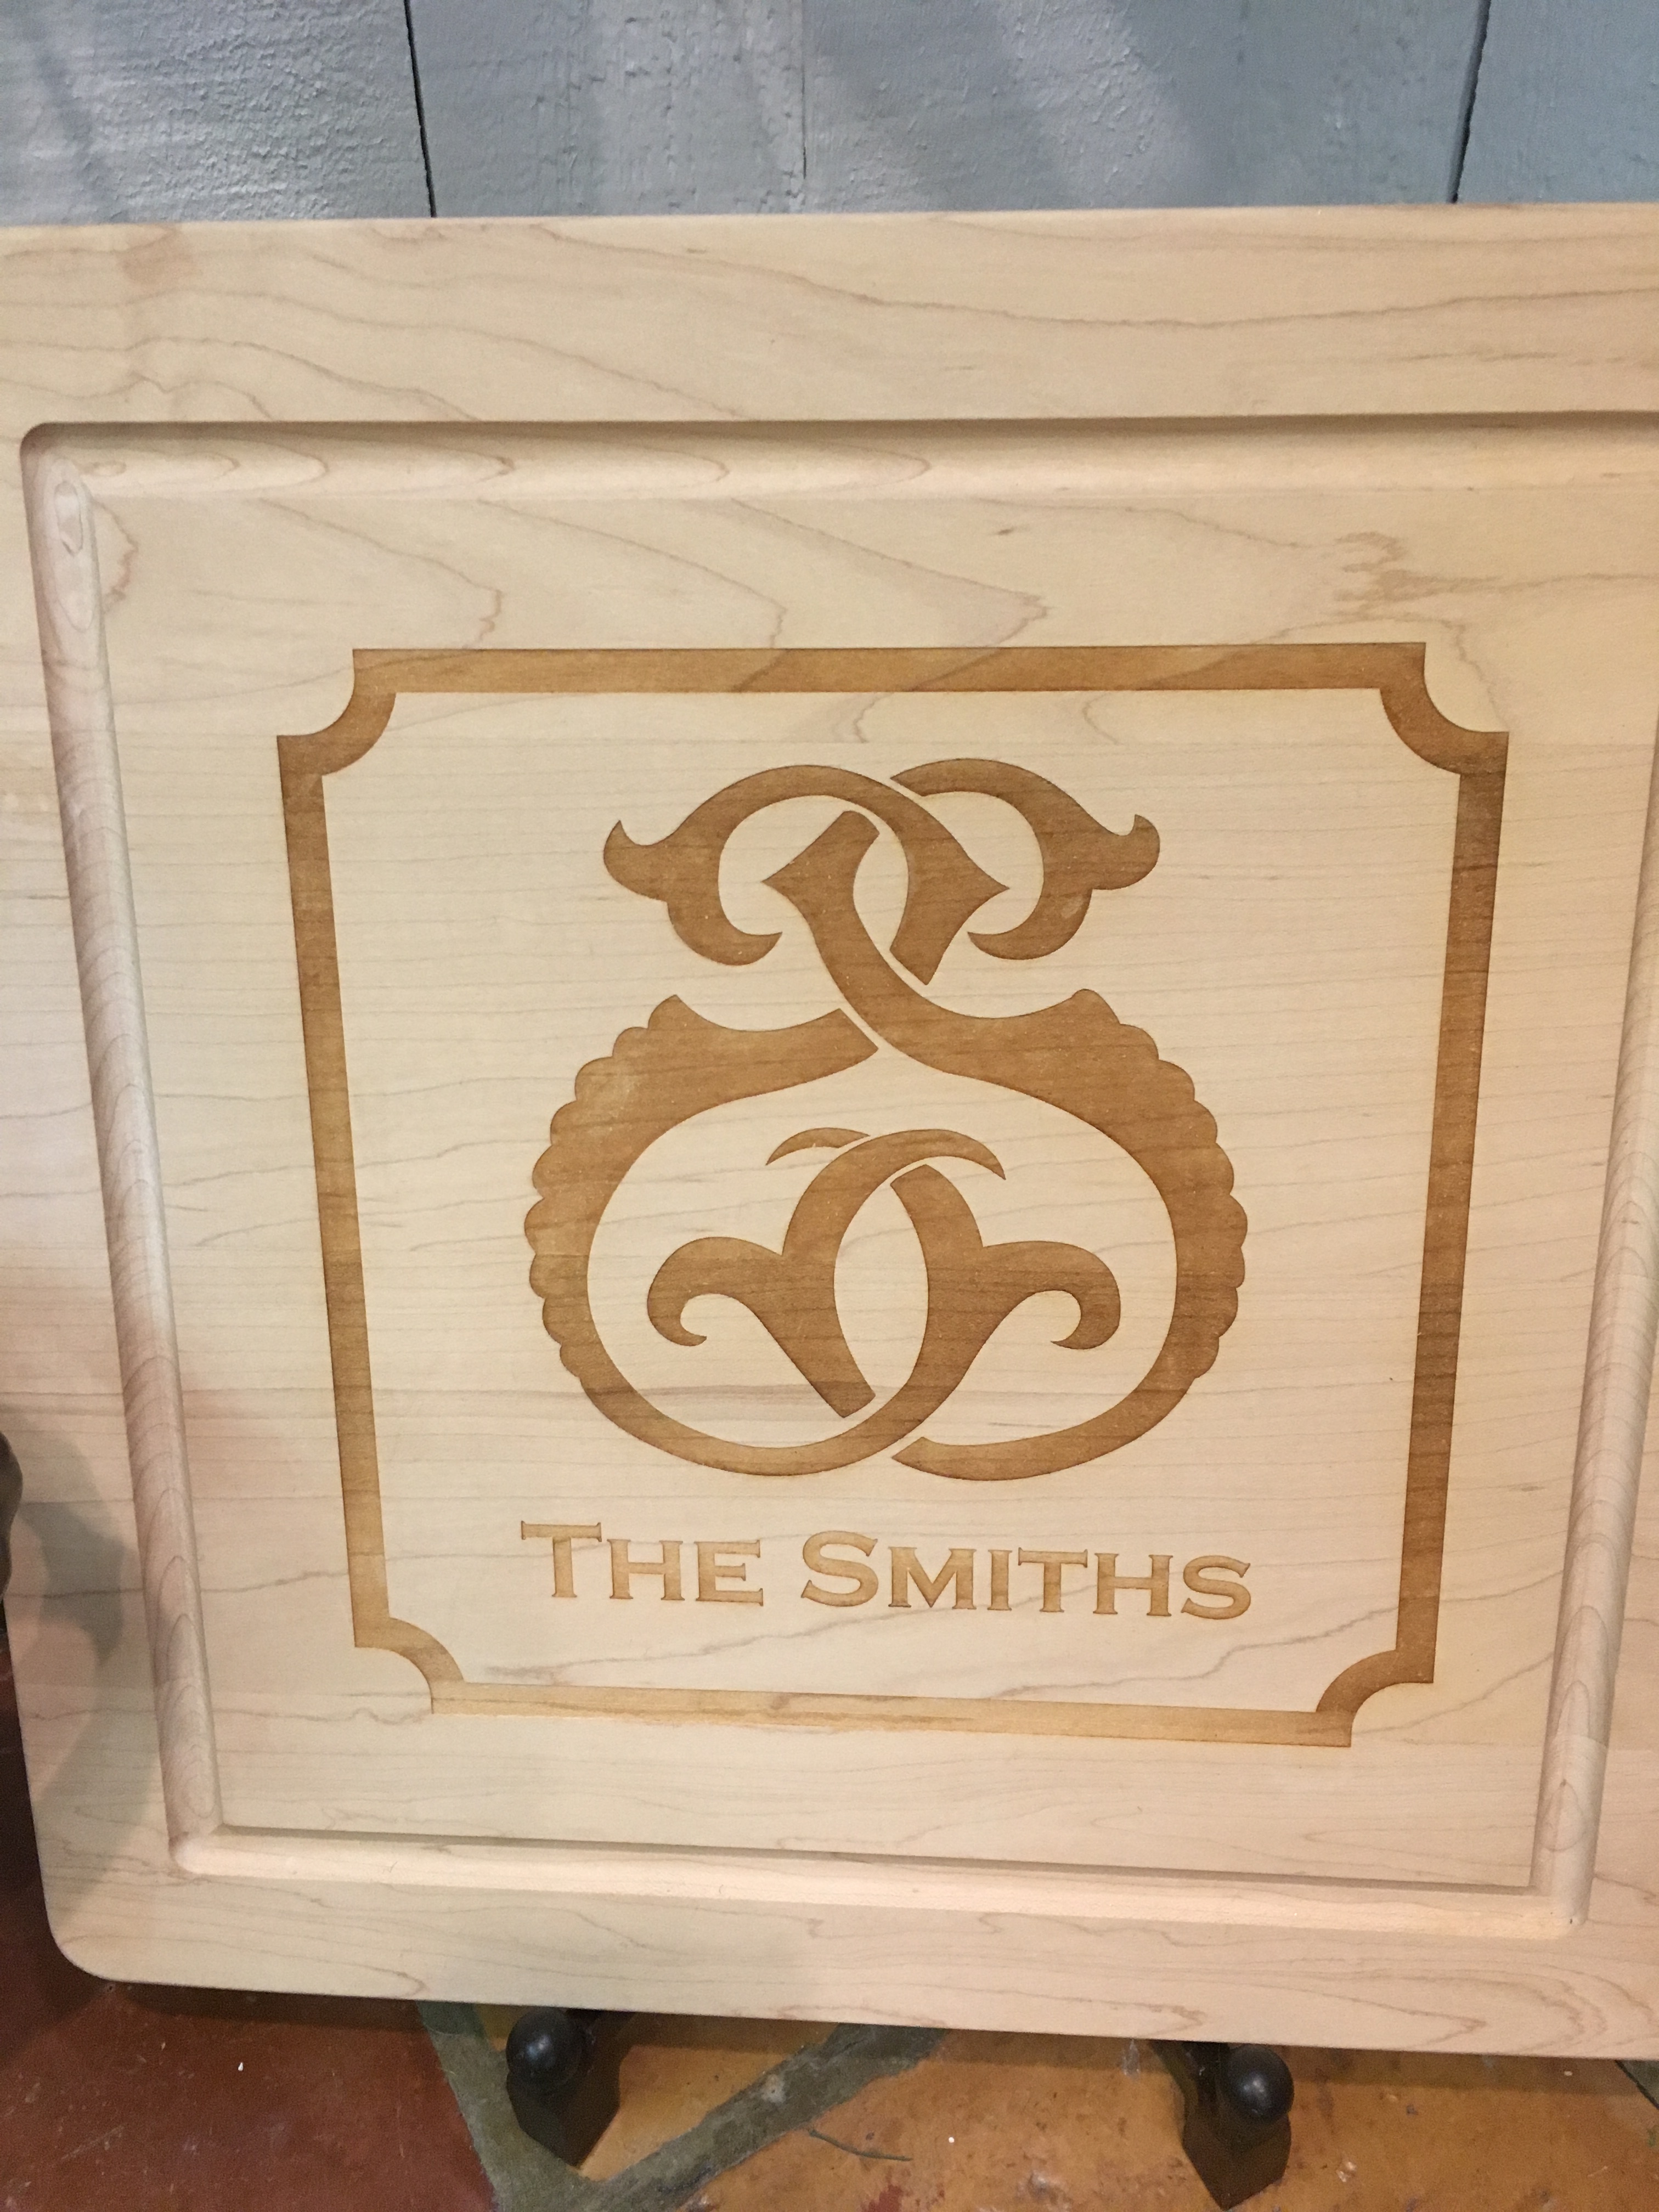 14" Square Board with Personalization on Front